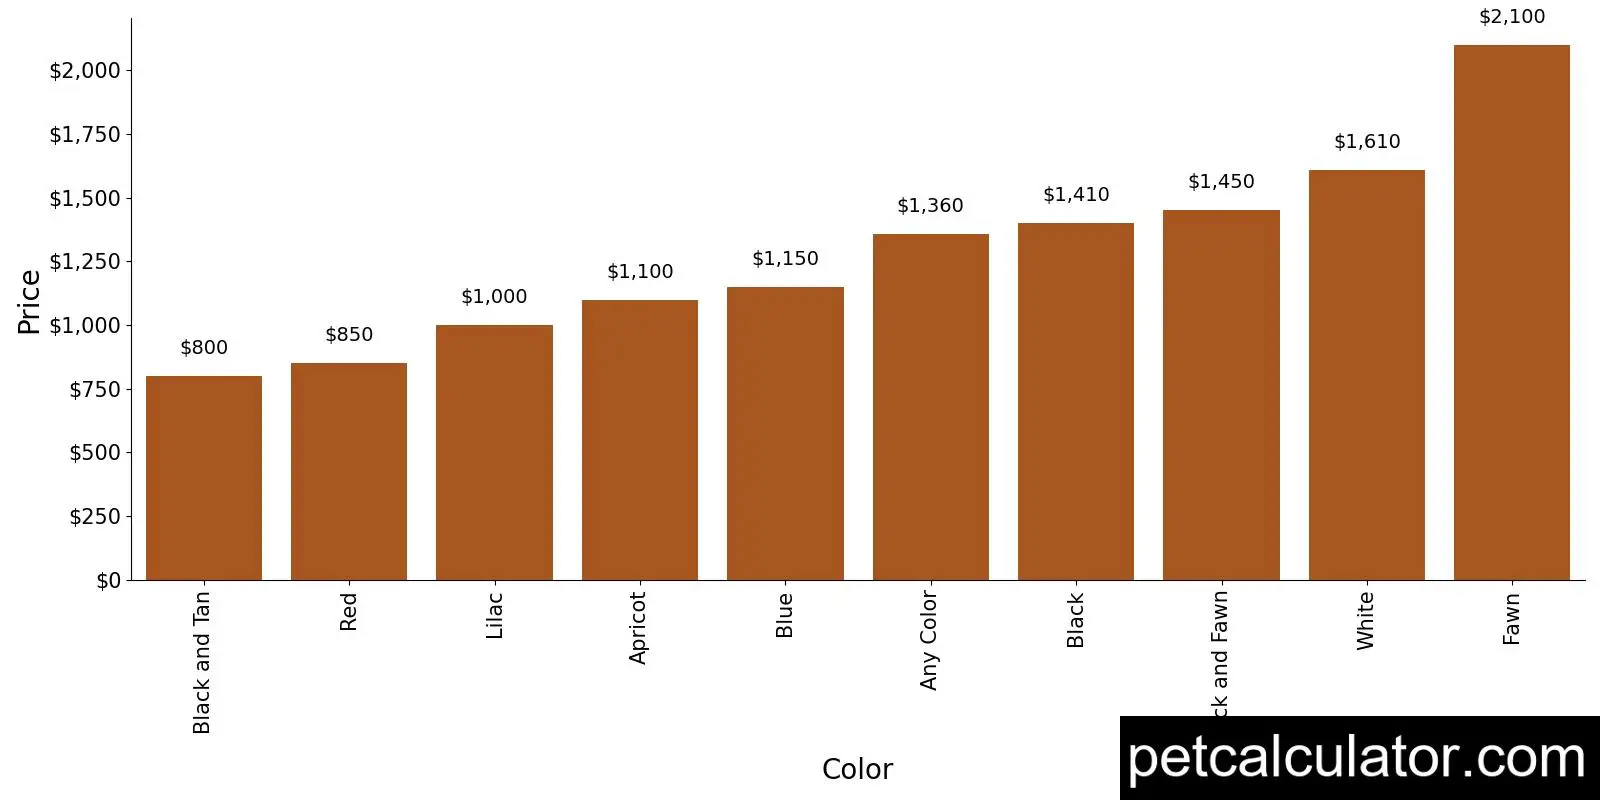 Price of Belgian Malinois by Color 